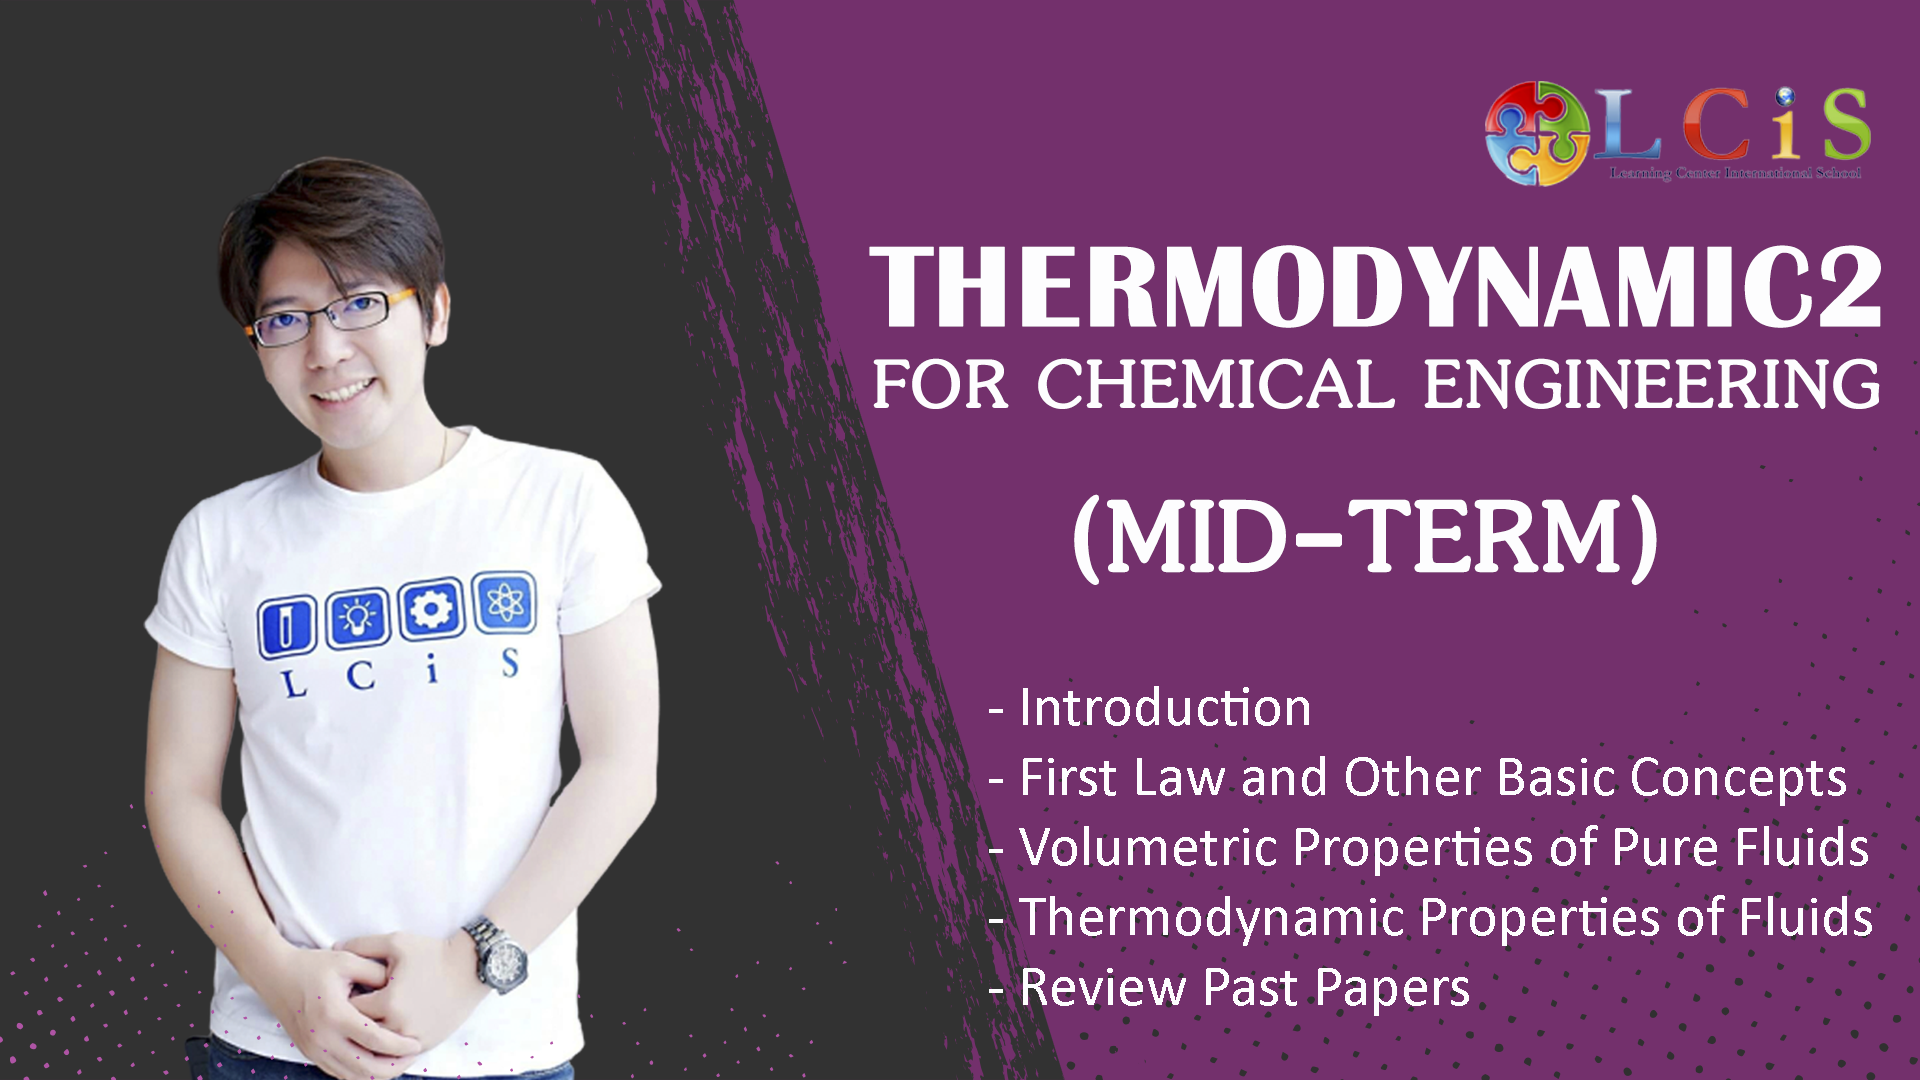 Thermodynamic2 for Chemical Engineering - Mid Term